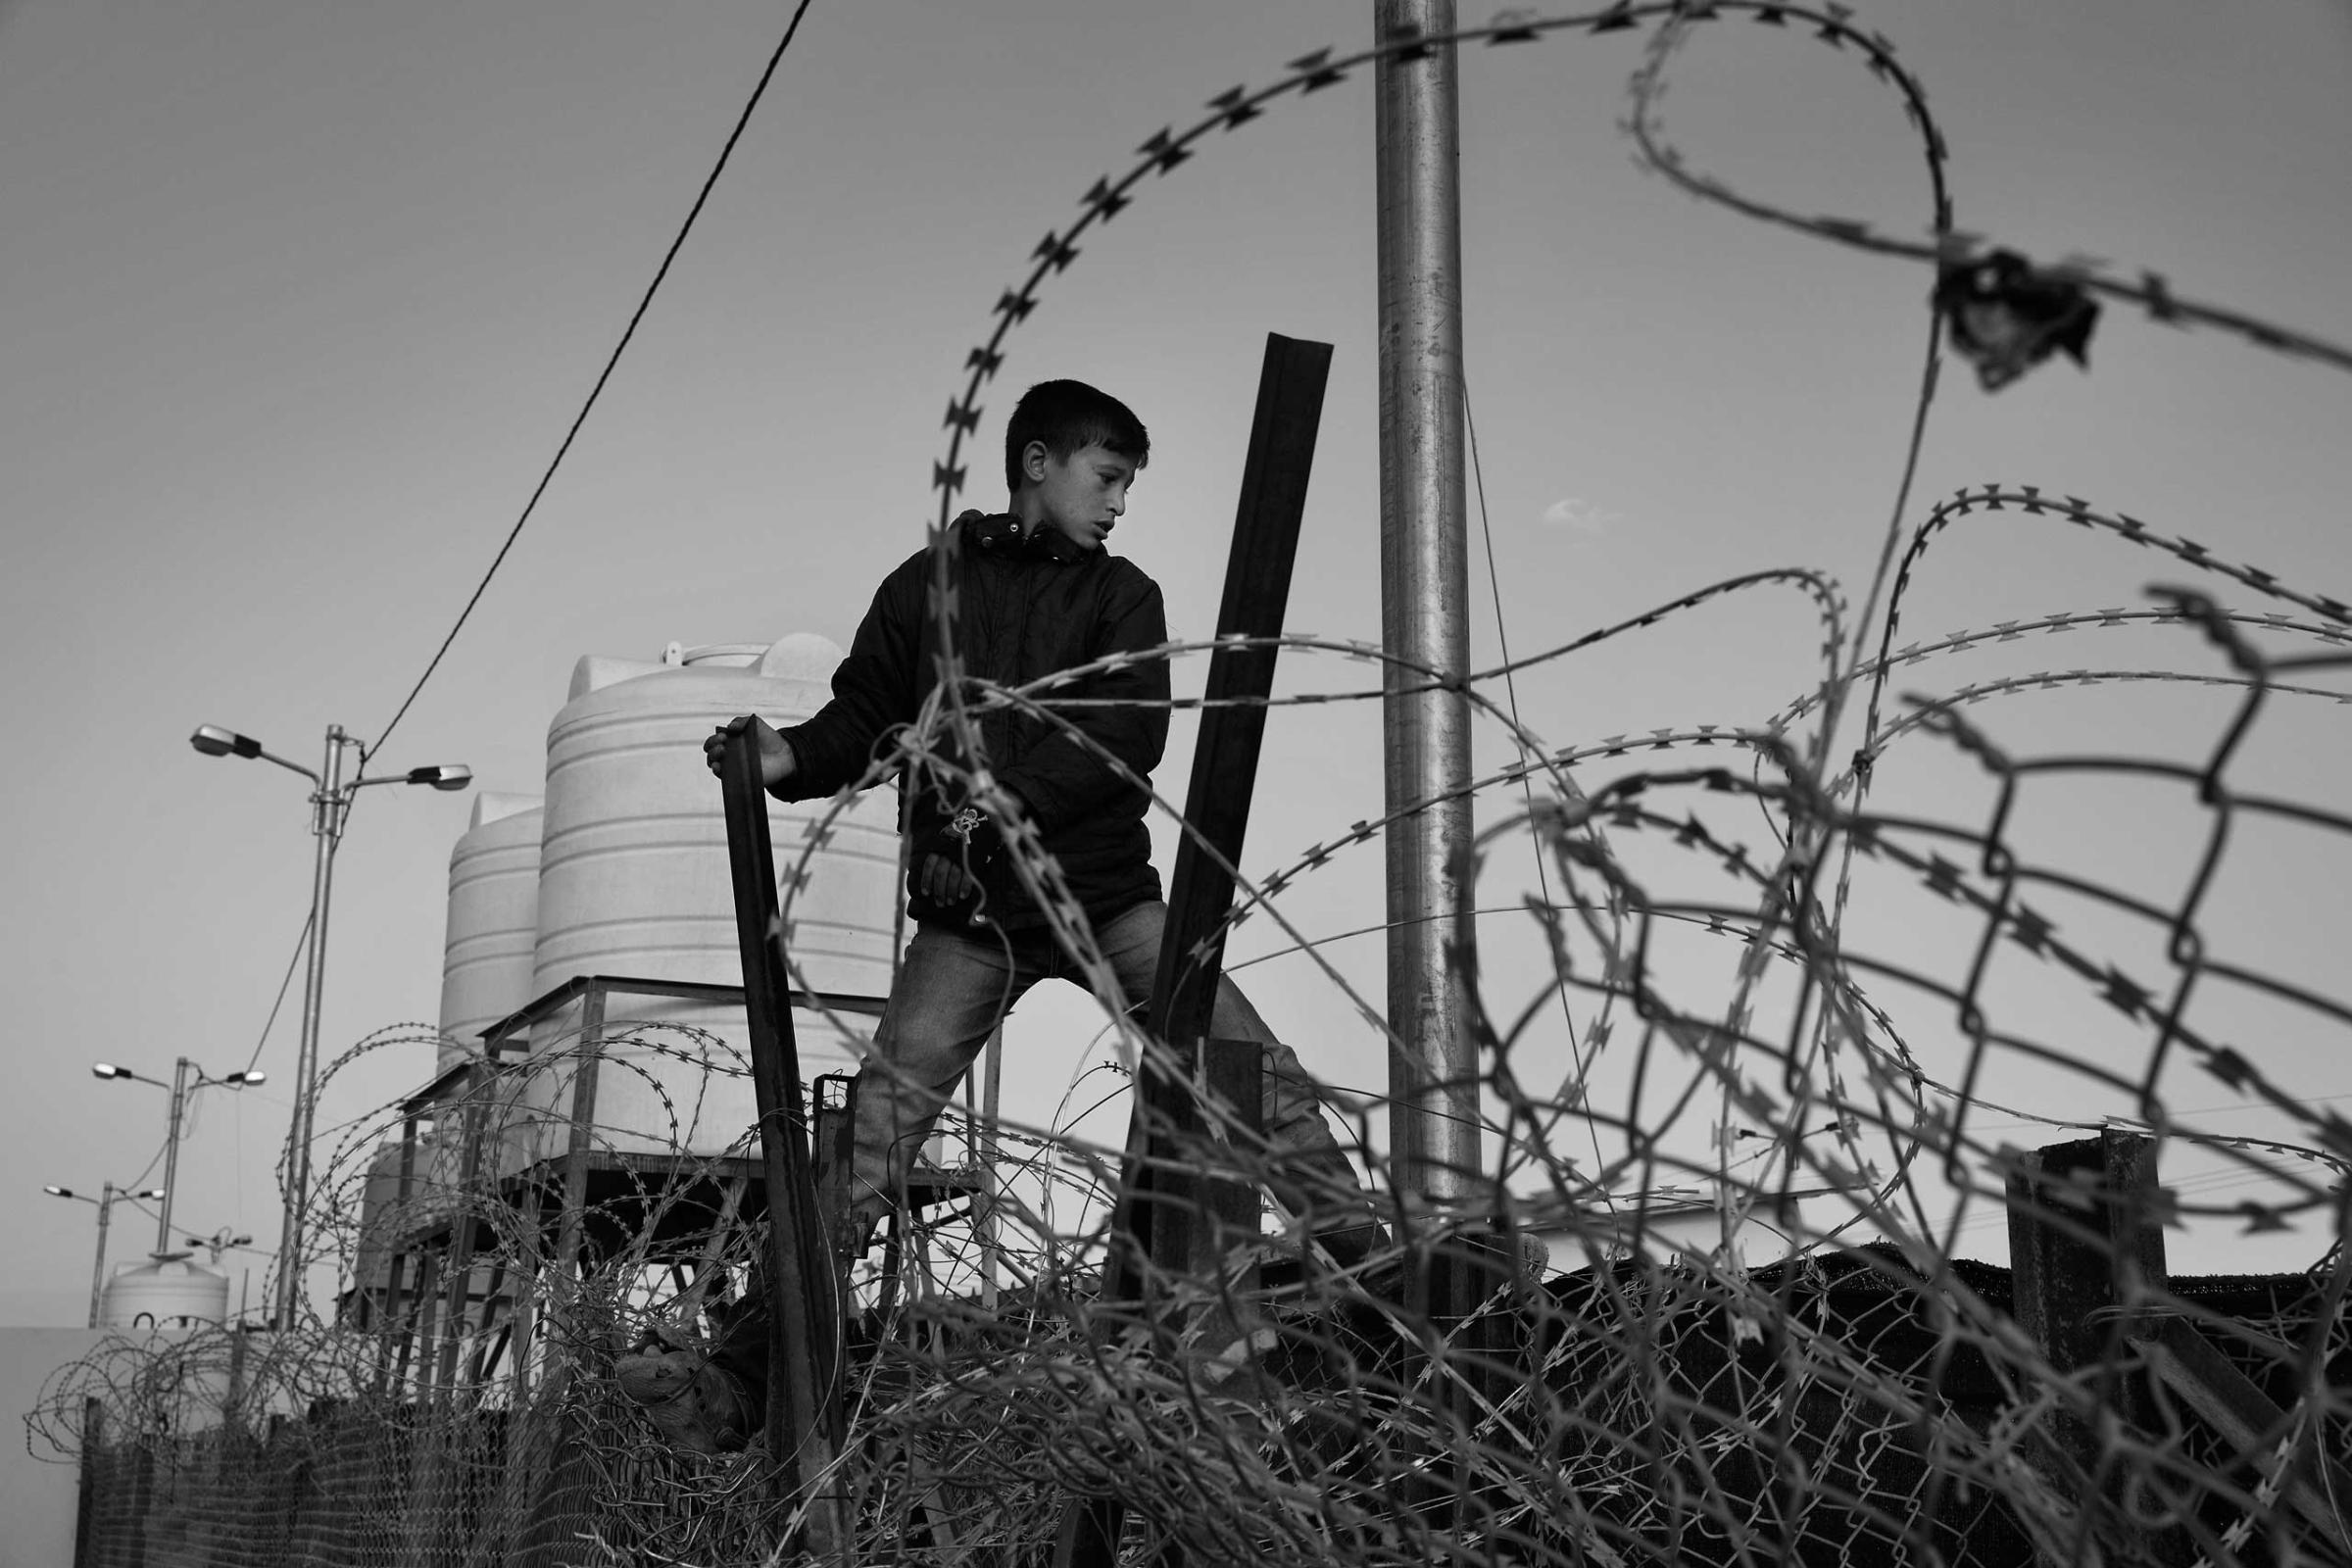 December 2013. Za'atari refugee camp, Jordan. Boys climb the fences to reach the newly arrived refugees and sell them bread, cigarettes and tea.